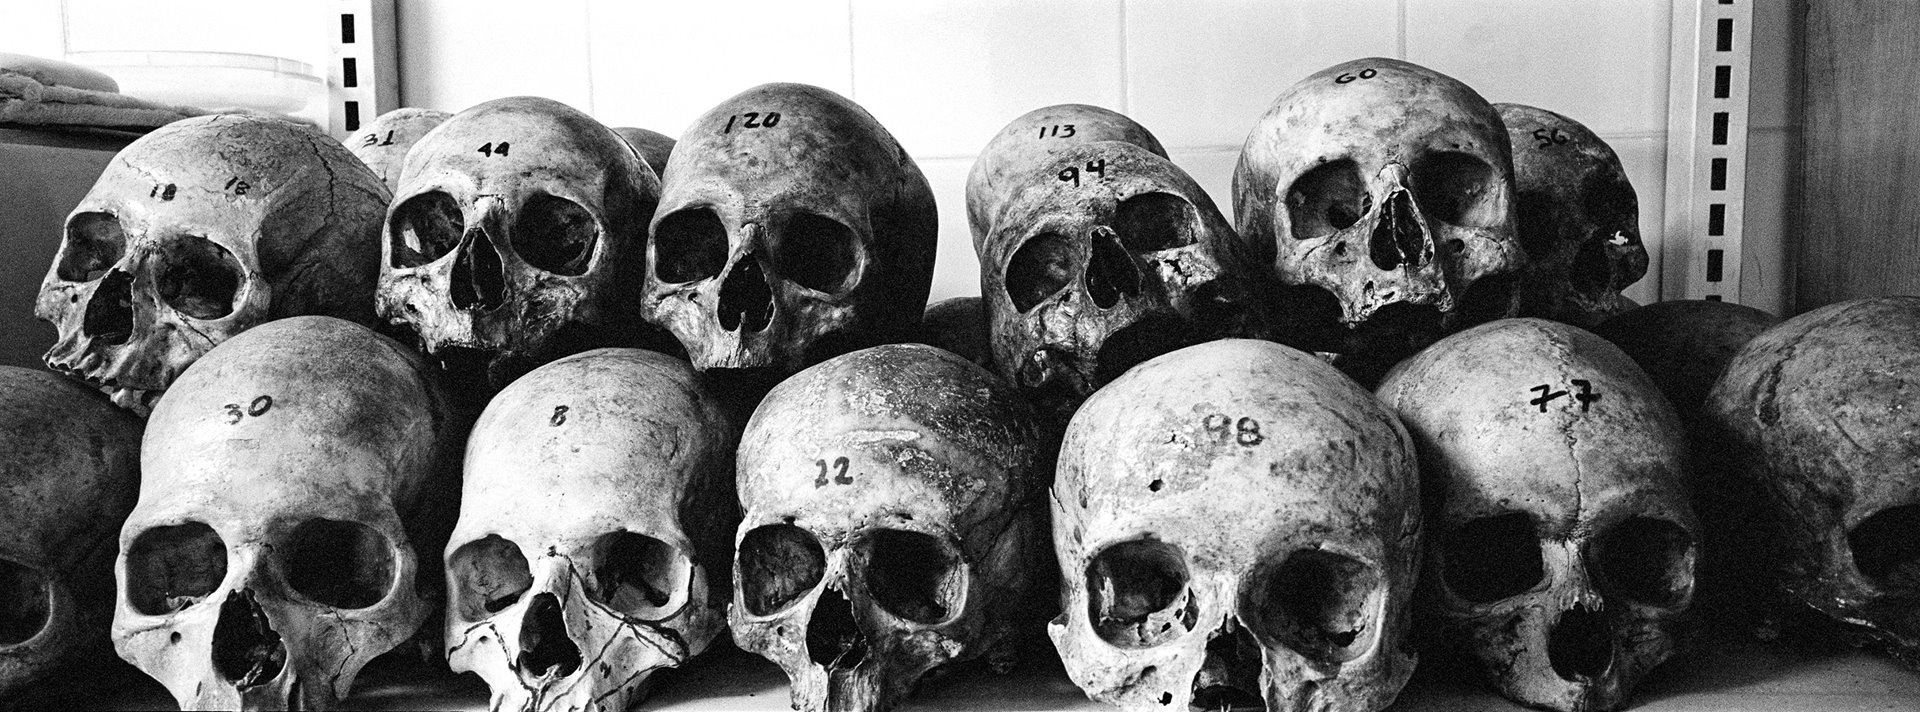 Skulls of people killed by different parties during the internal conflict in Colombia lie in the National School of Criminalistic and Forensic Science (ENAC), in Medellín, Antioquia, Colombia.